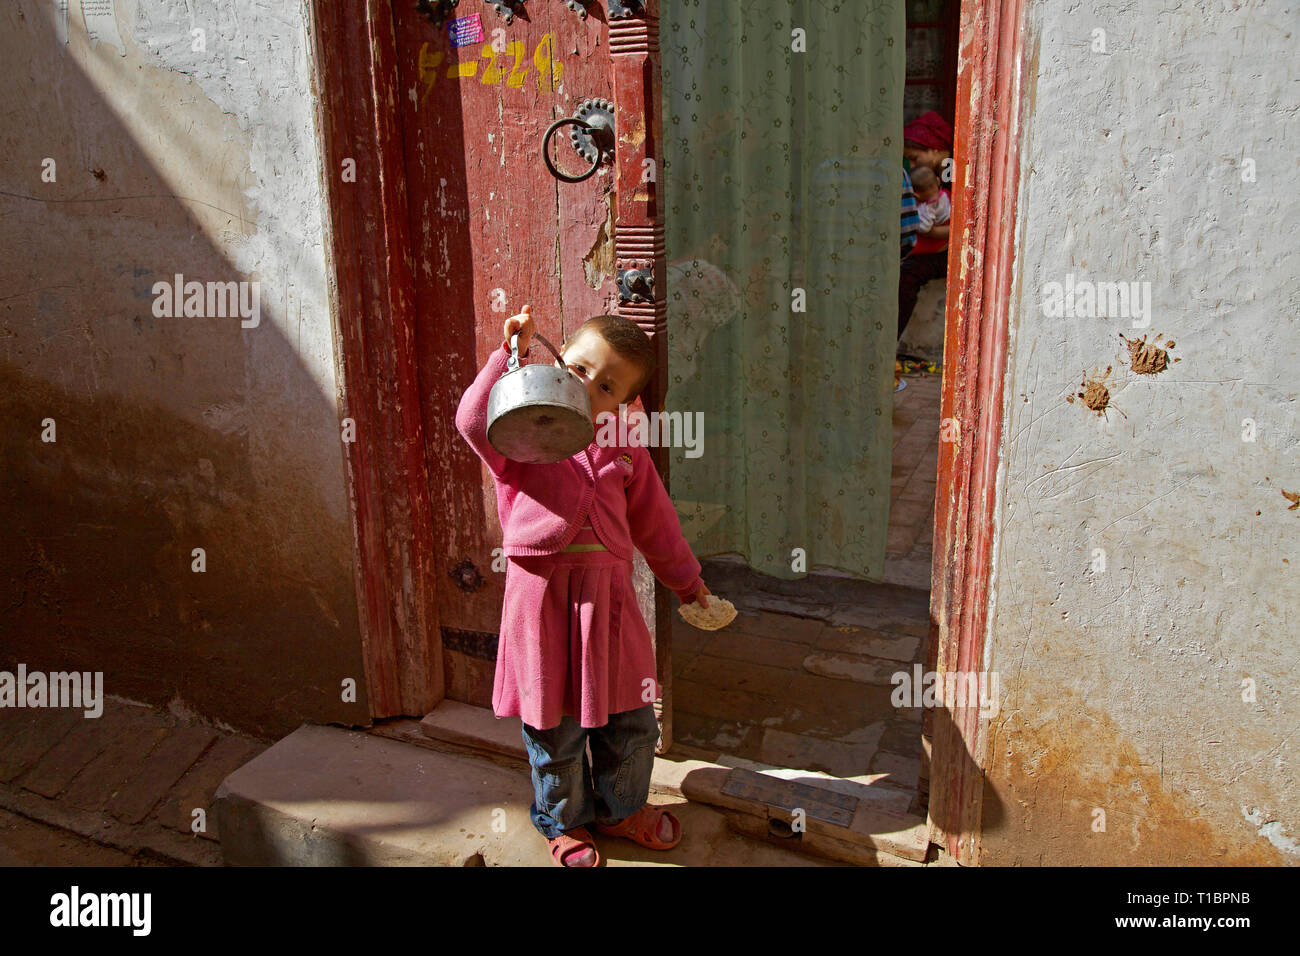 Small Uighur child drinking water outside her house, Kashgar Old Town, Xinjiang Autonomous Region, China. Stock Photo